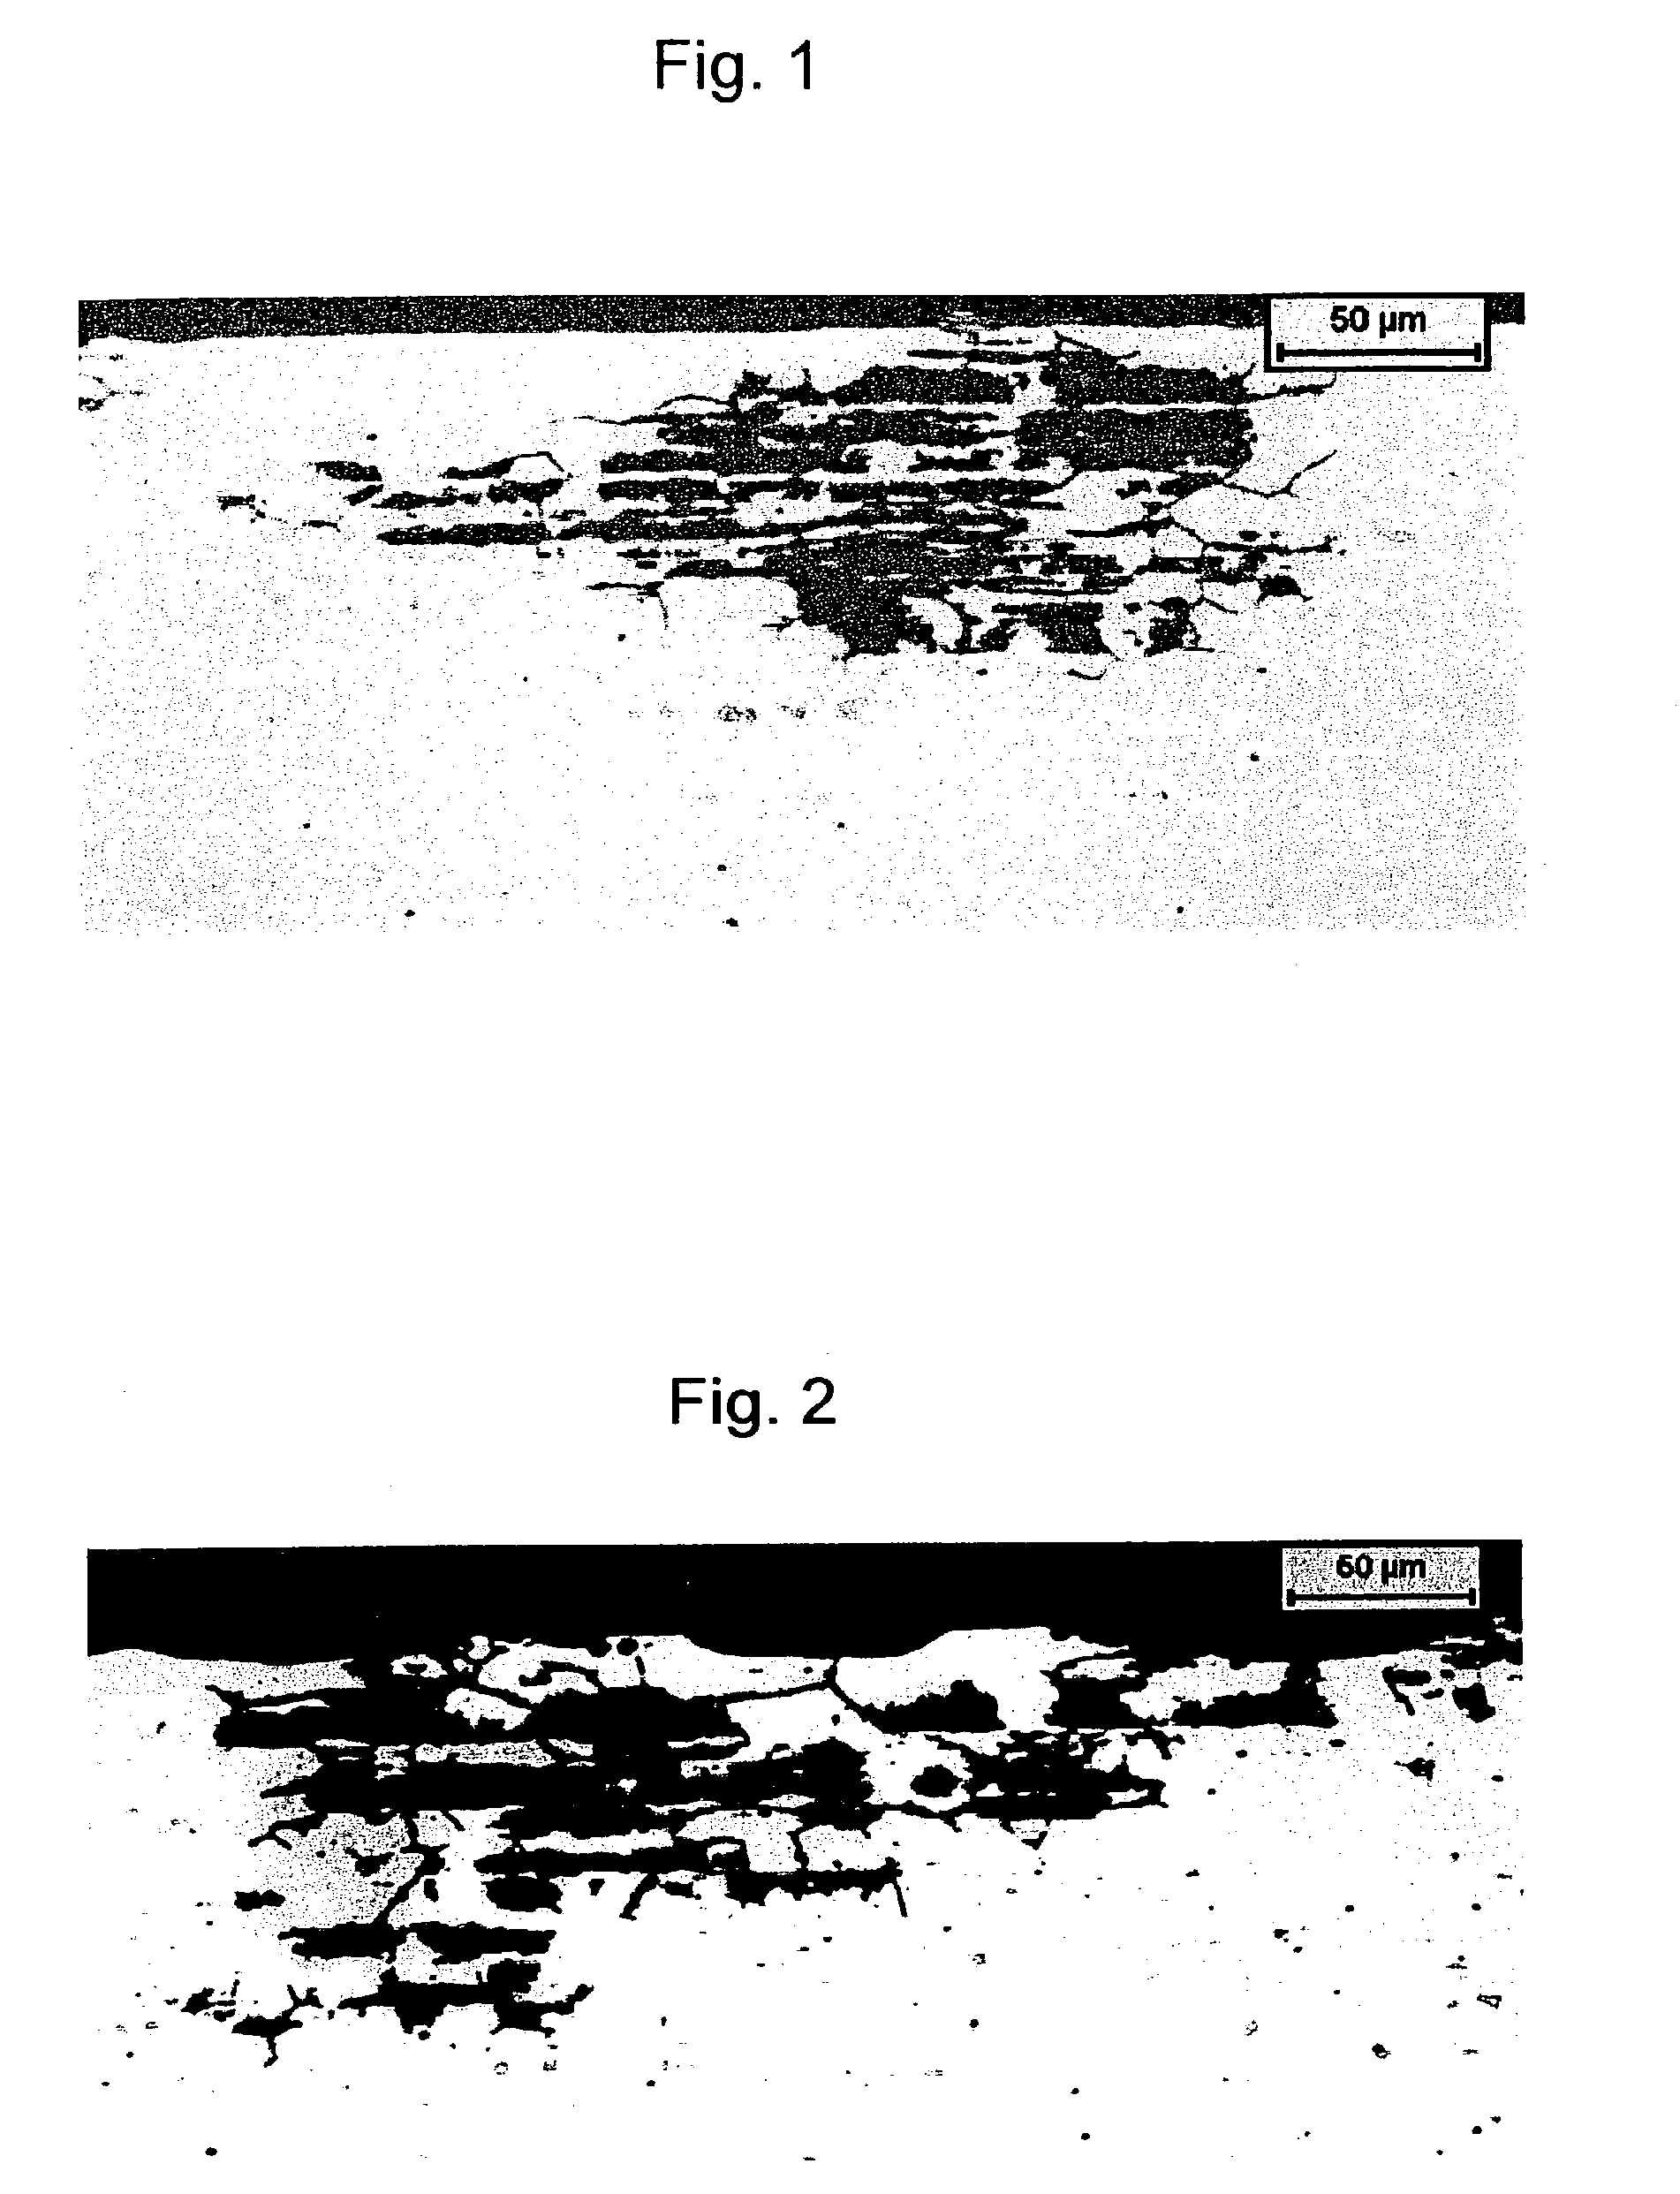 Method of producing a high strength balanced Al-Mg-Si alloy and a weldable product of that alloy